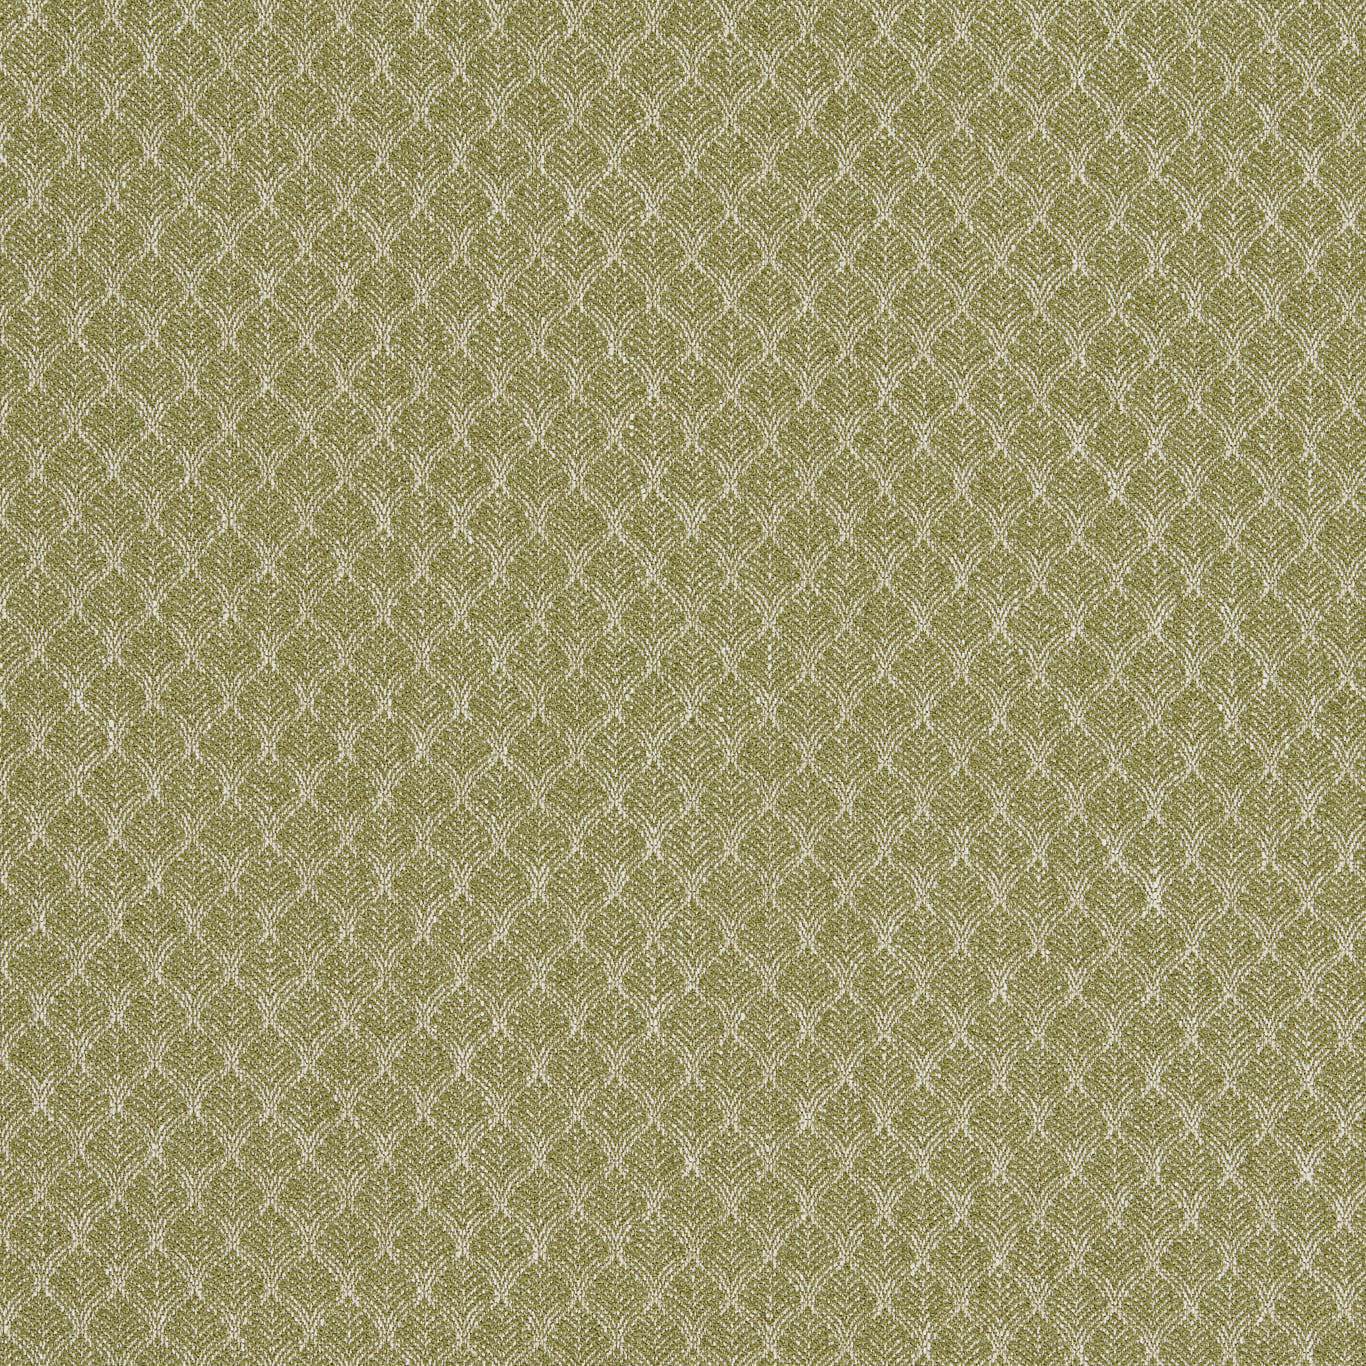 Trelica Olive Fabric by CNC